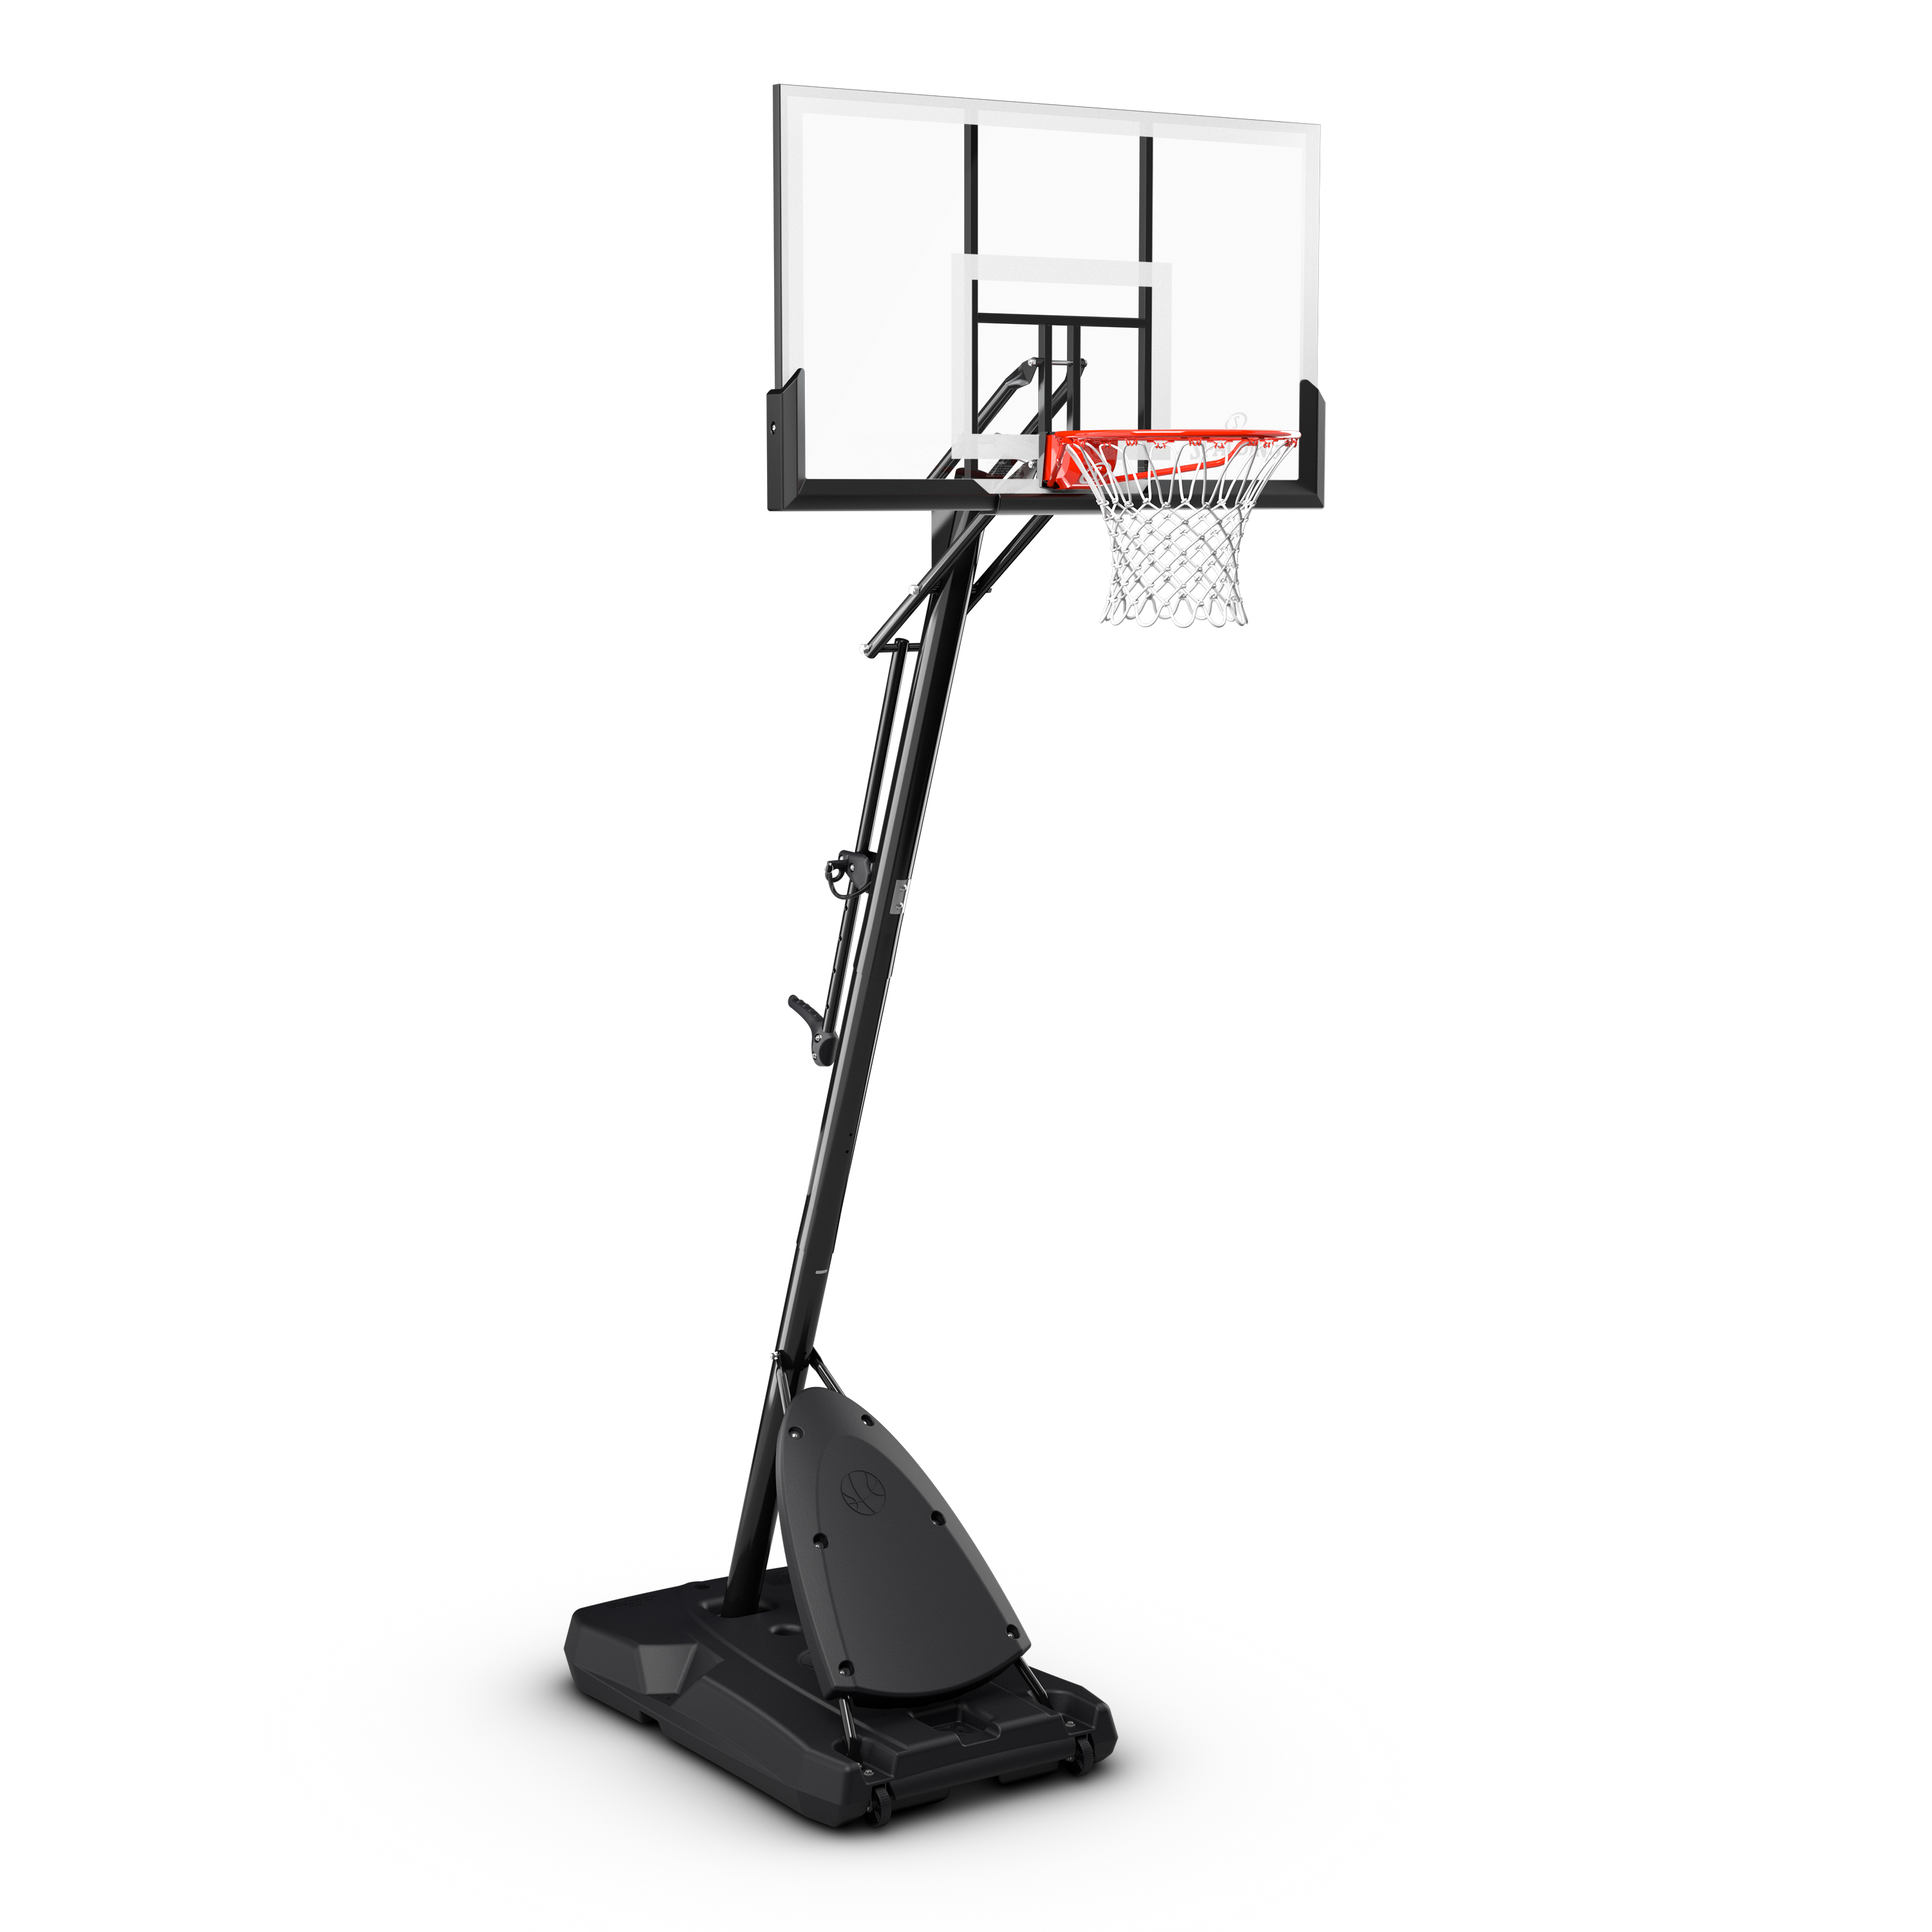 Spalding 54 inch Shatter-proof Polycarbonate Exacta Height® Portable Basketball Hoop System - image 1 of 12